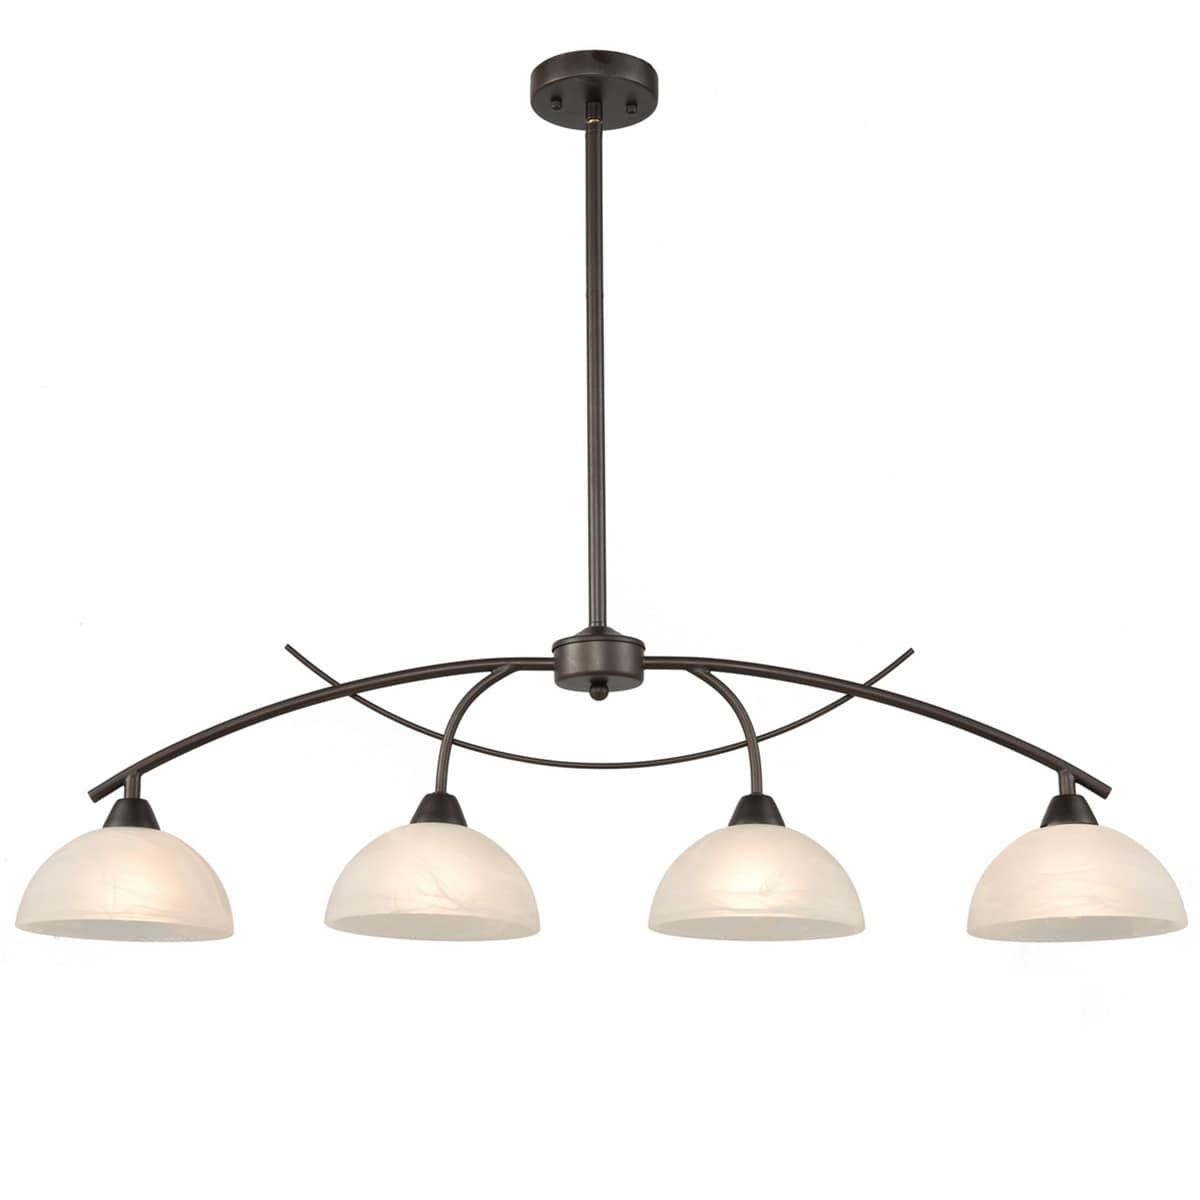 4 Light Farmhouse Pendant Lights For Kitchen Island, Arch With Bronze Kitchen Island Chandeliers (View 5 of 15)